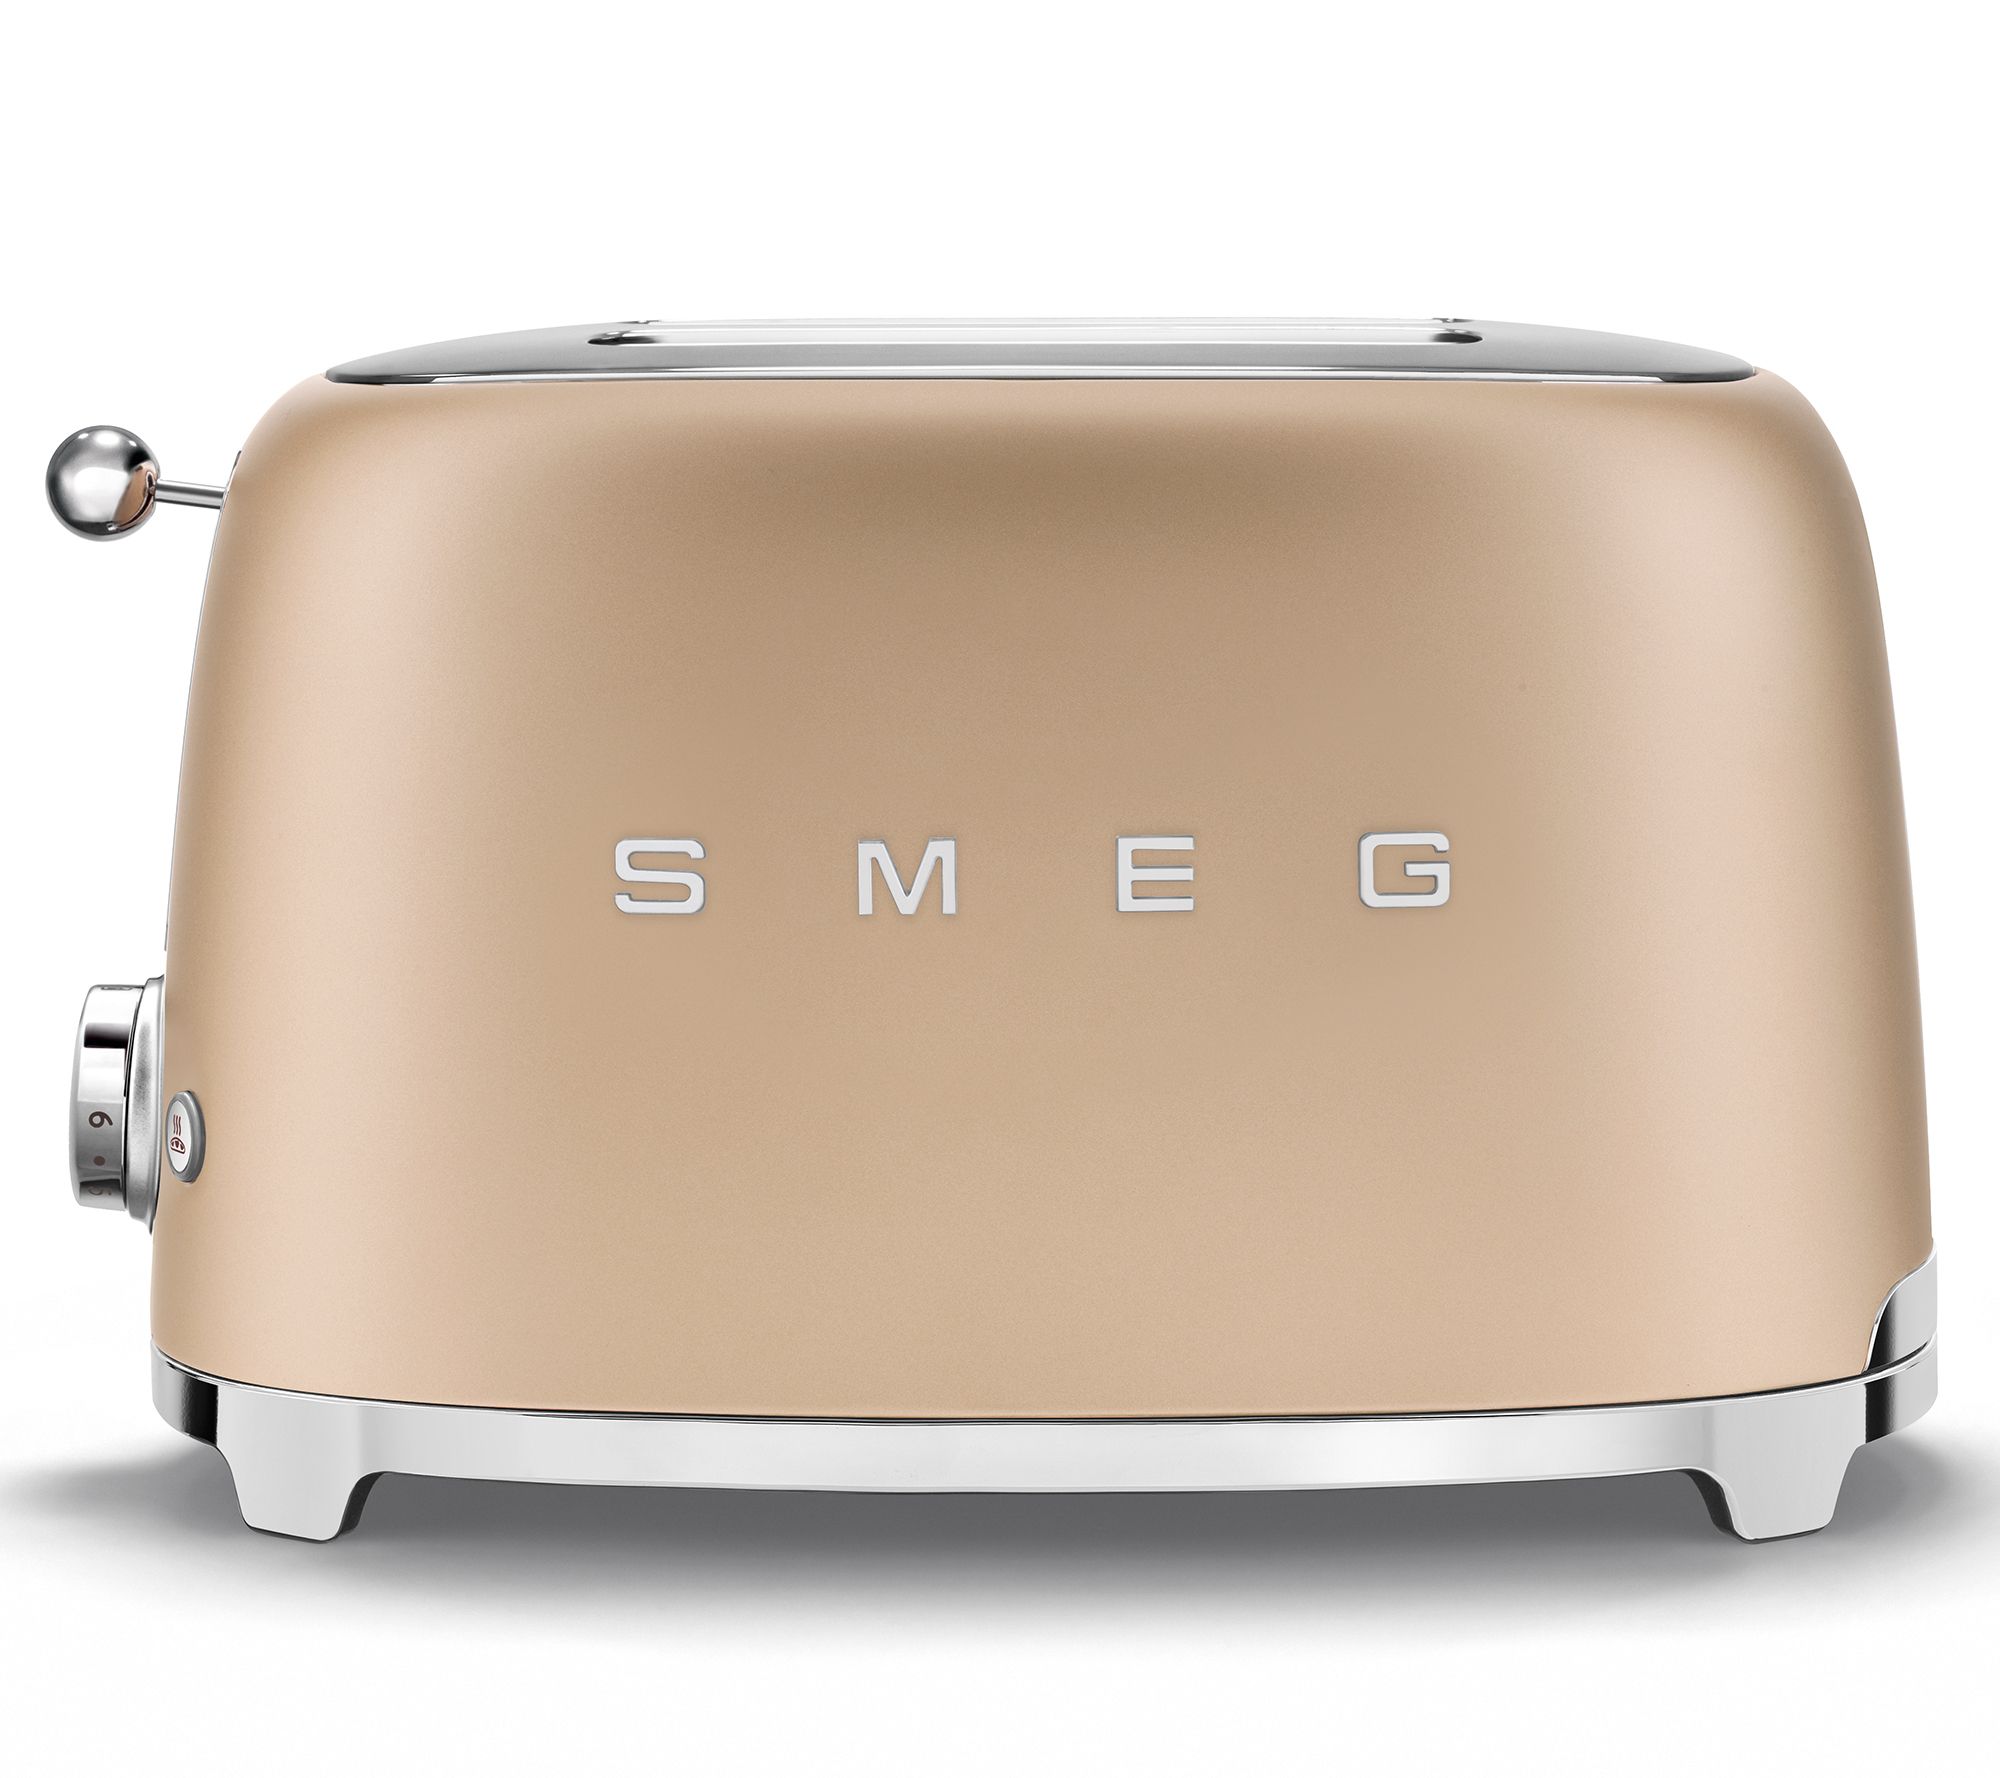 Grille-pain SMEG 2 tranches style années 50 vert aqua inox 950W 198x31 –  Angelica Home Stabia